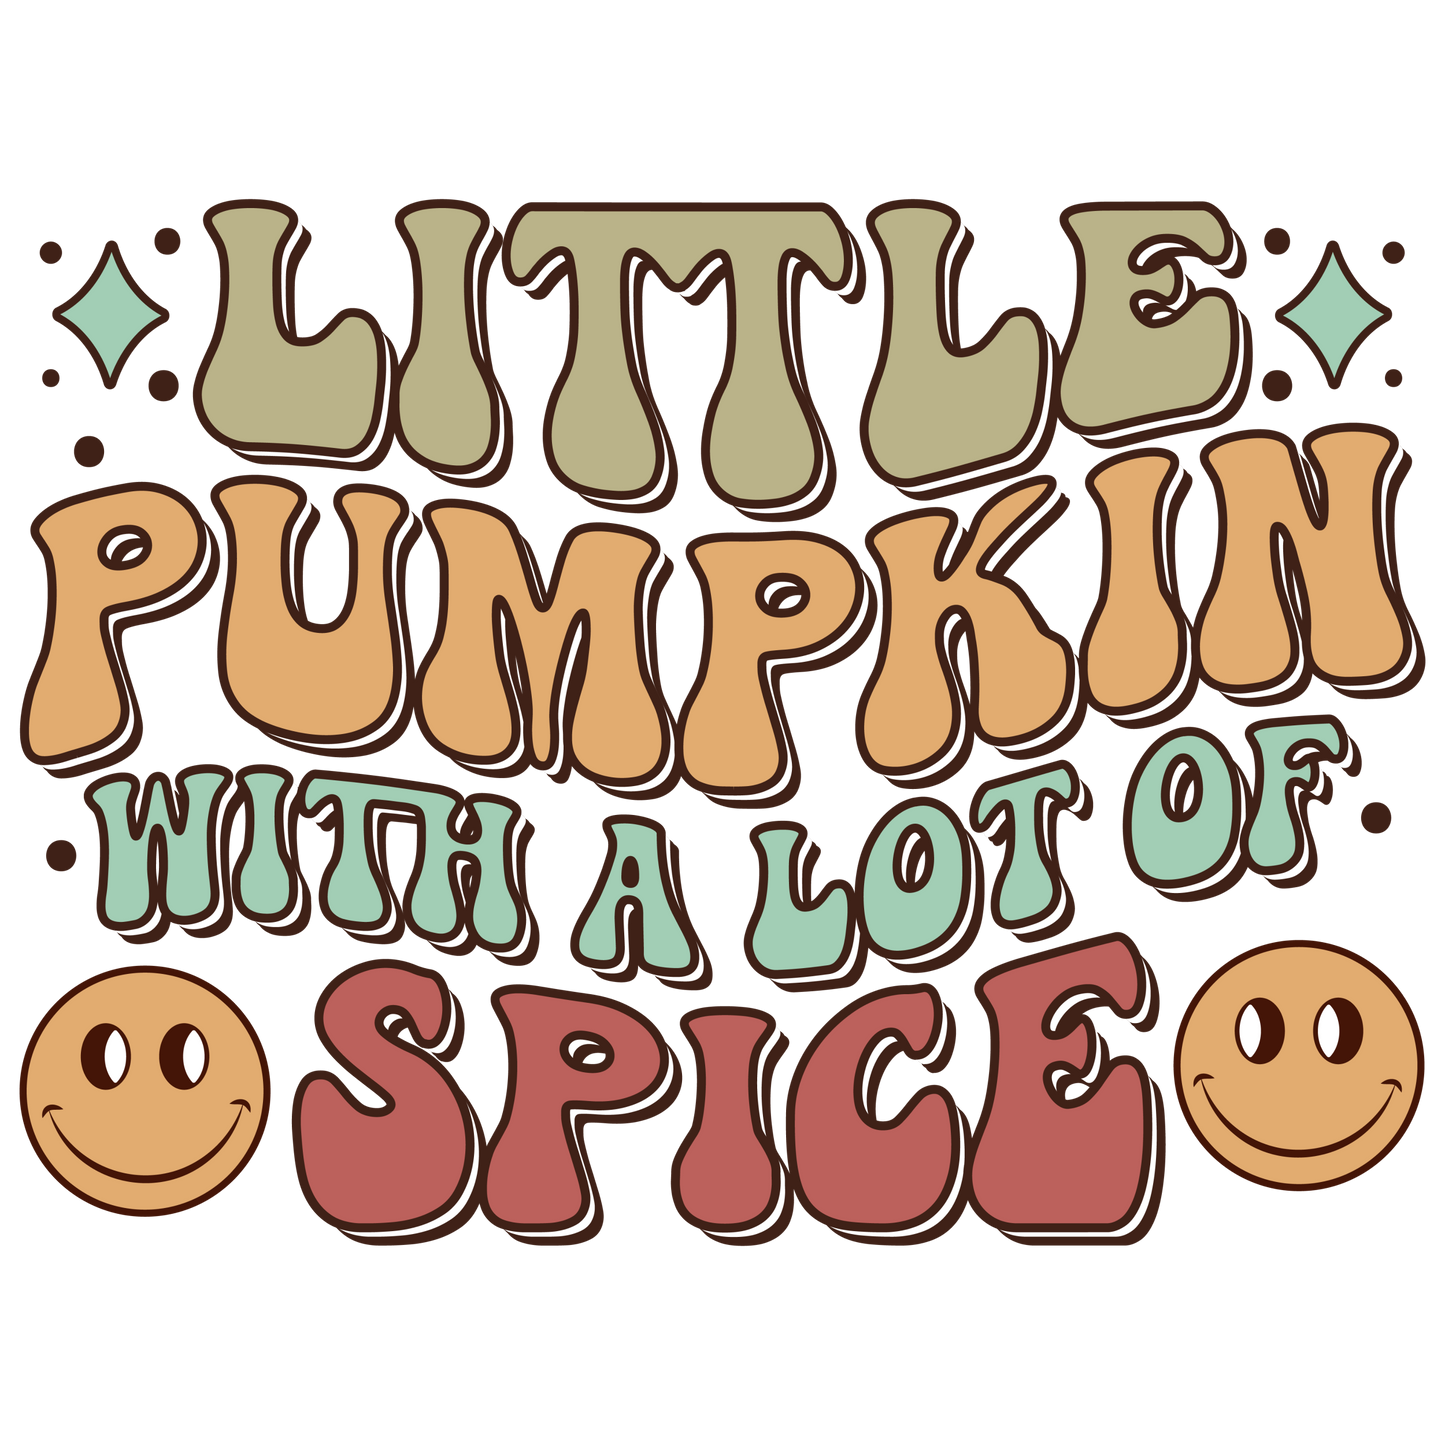 LITTLE PUMPKIN WITH A LOT OF SPICE